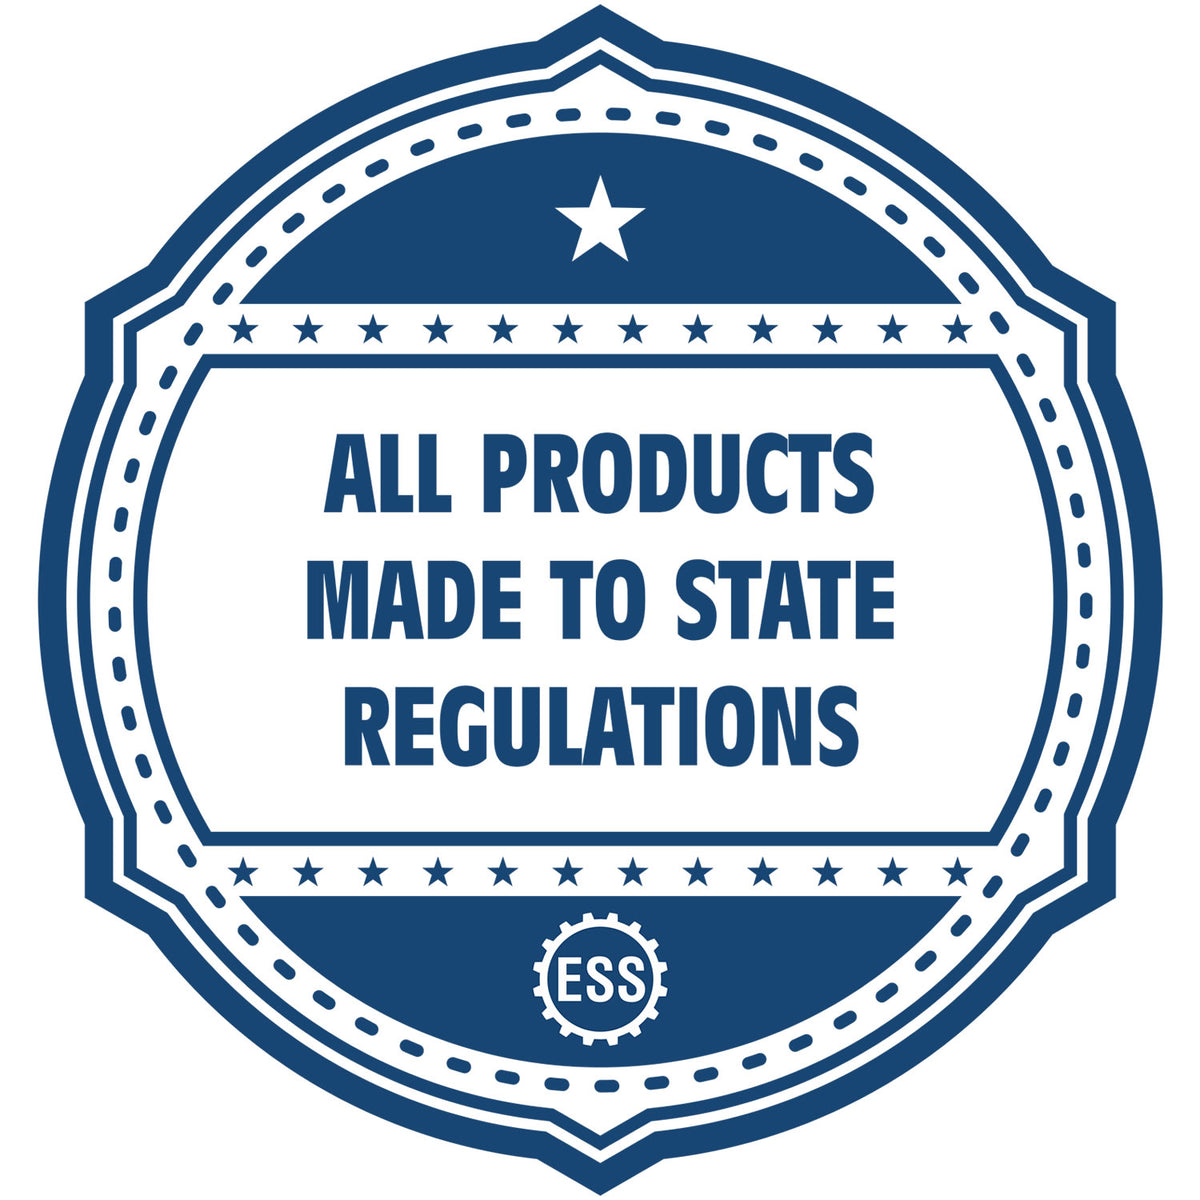 An icon or badge element for the Slim Pre-Inked State Seal Notary Stamp for Maine showing that this product is made in compliance with state regulations.